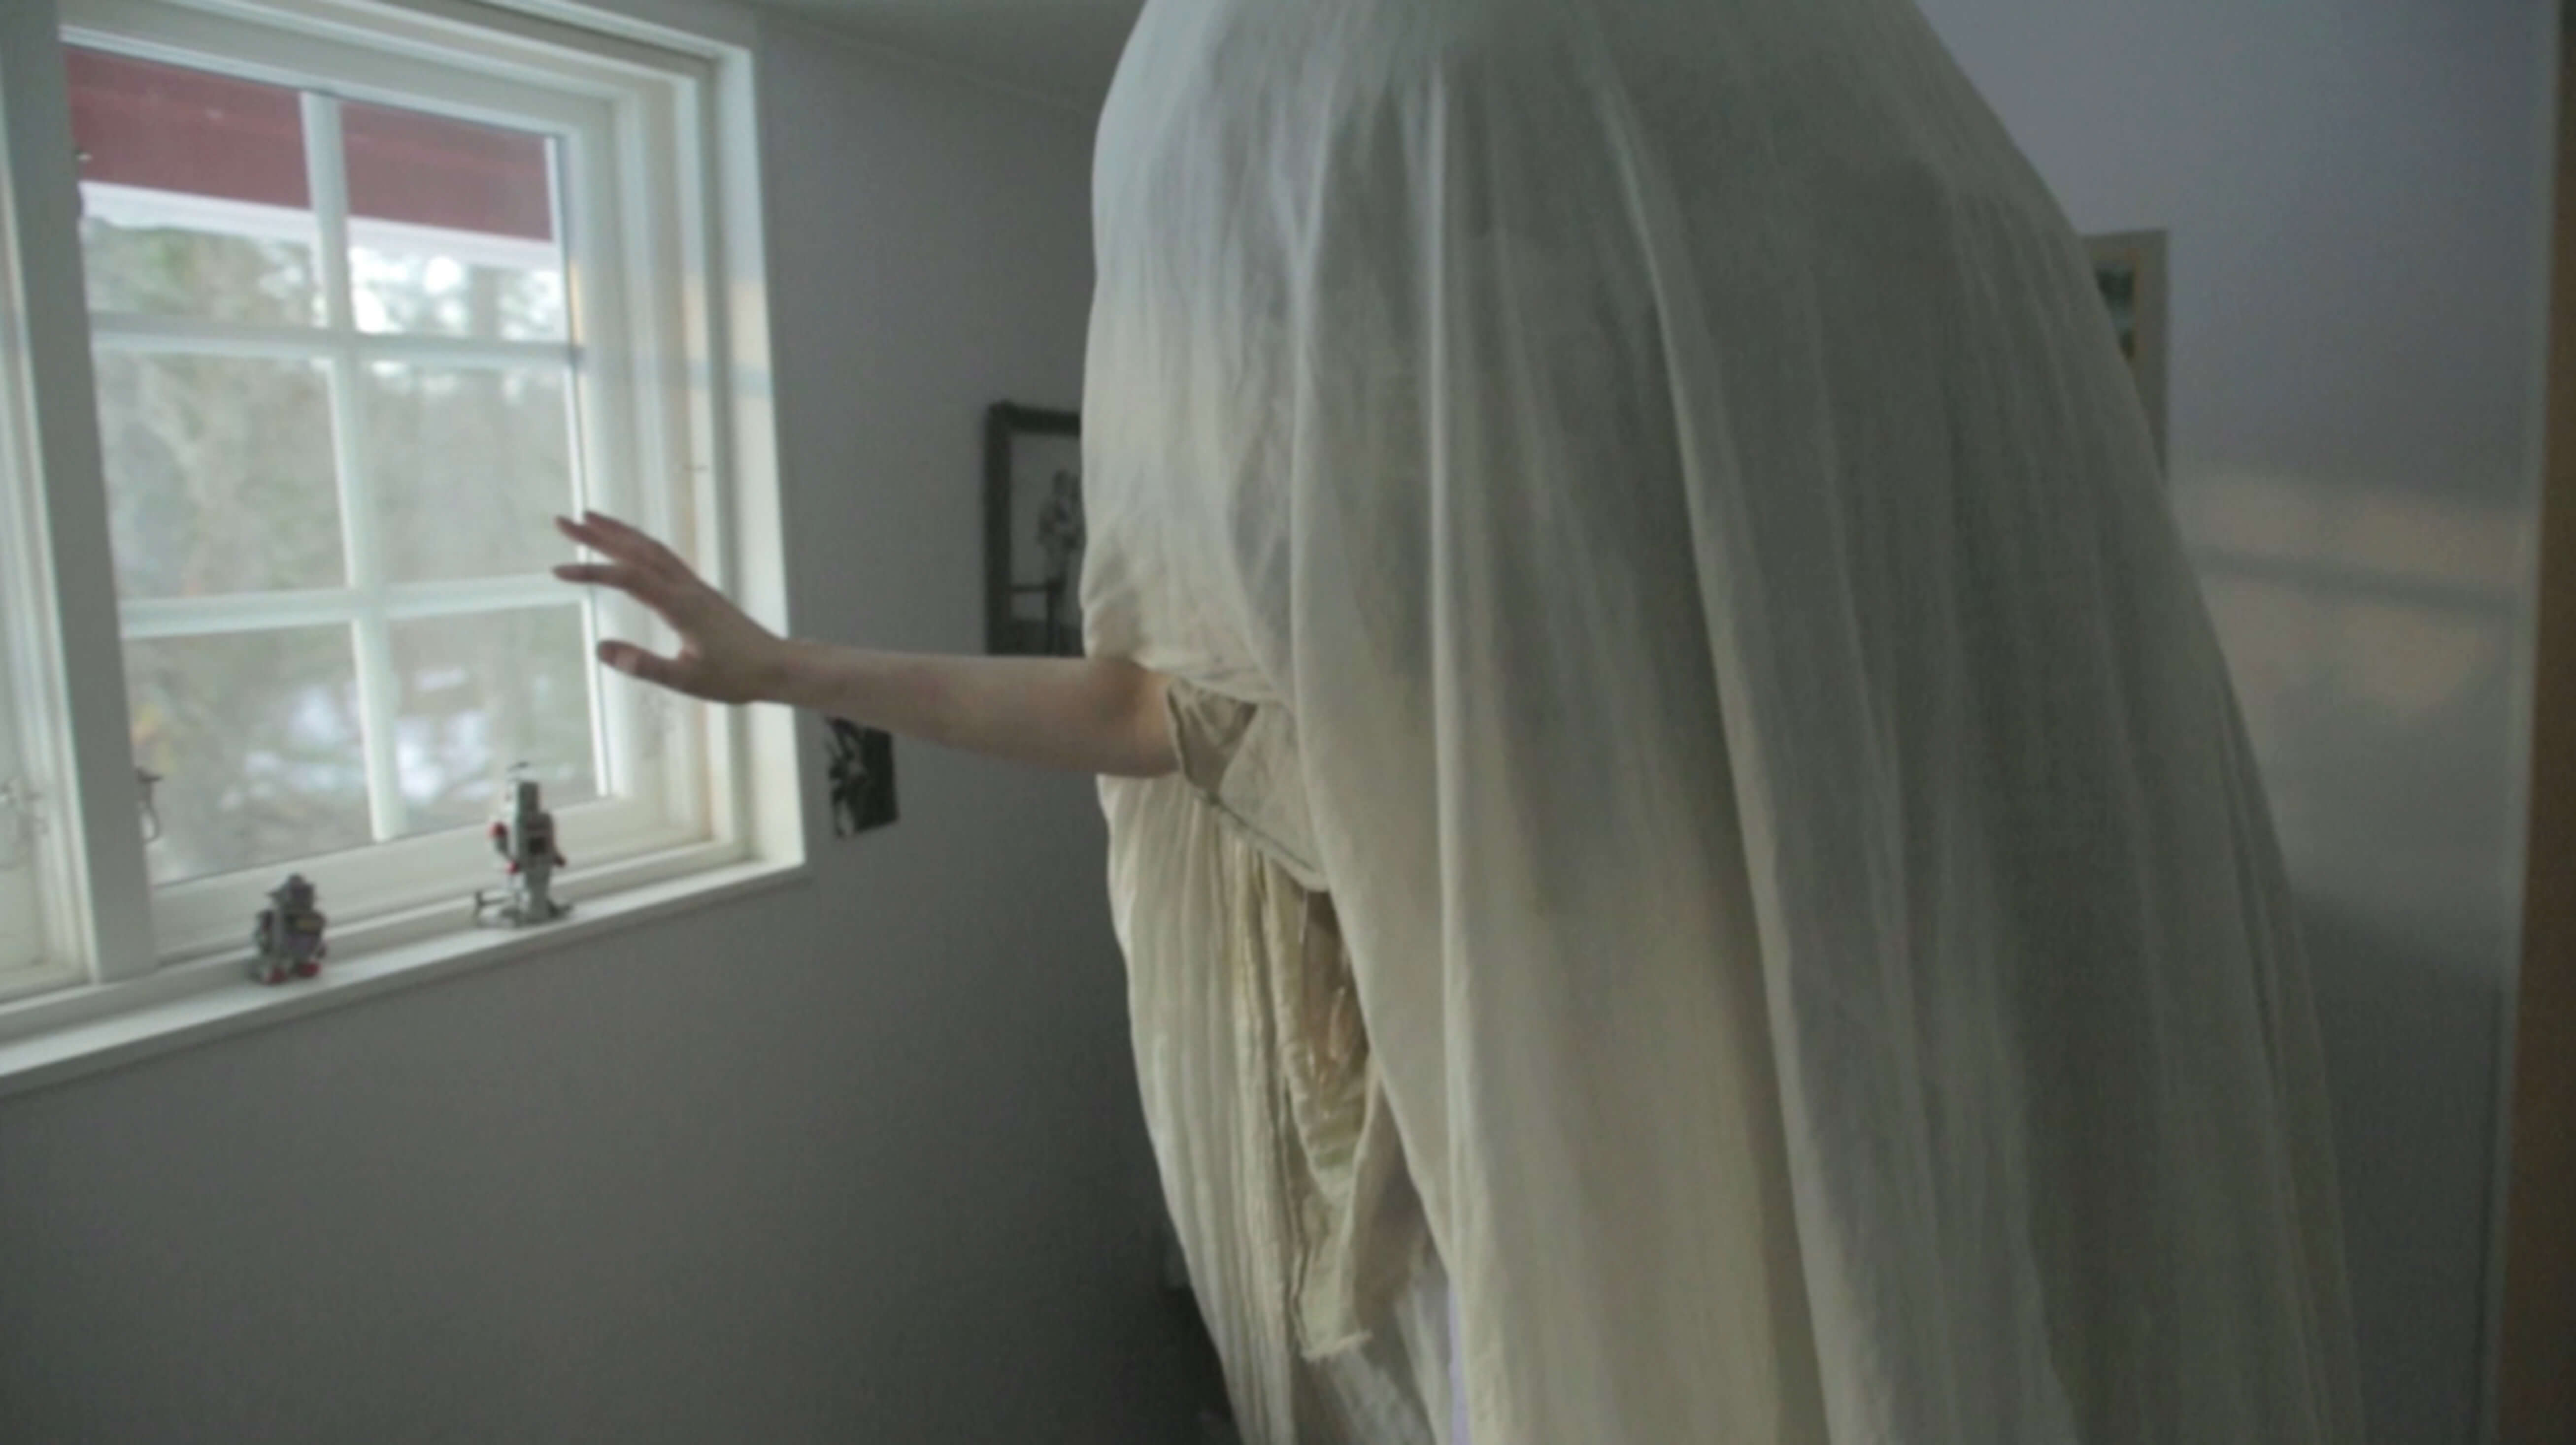 A person under a white sheet extends an arm out.